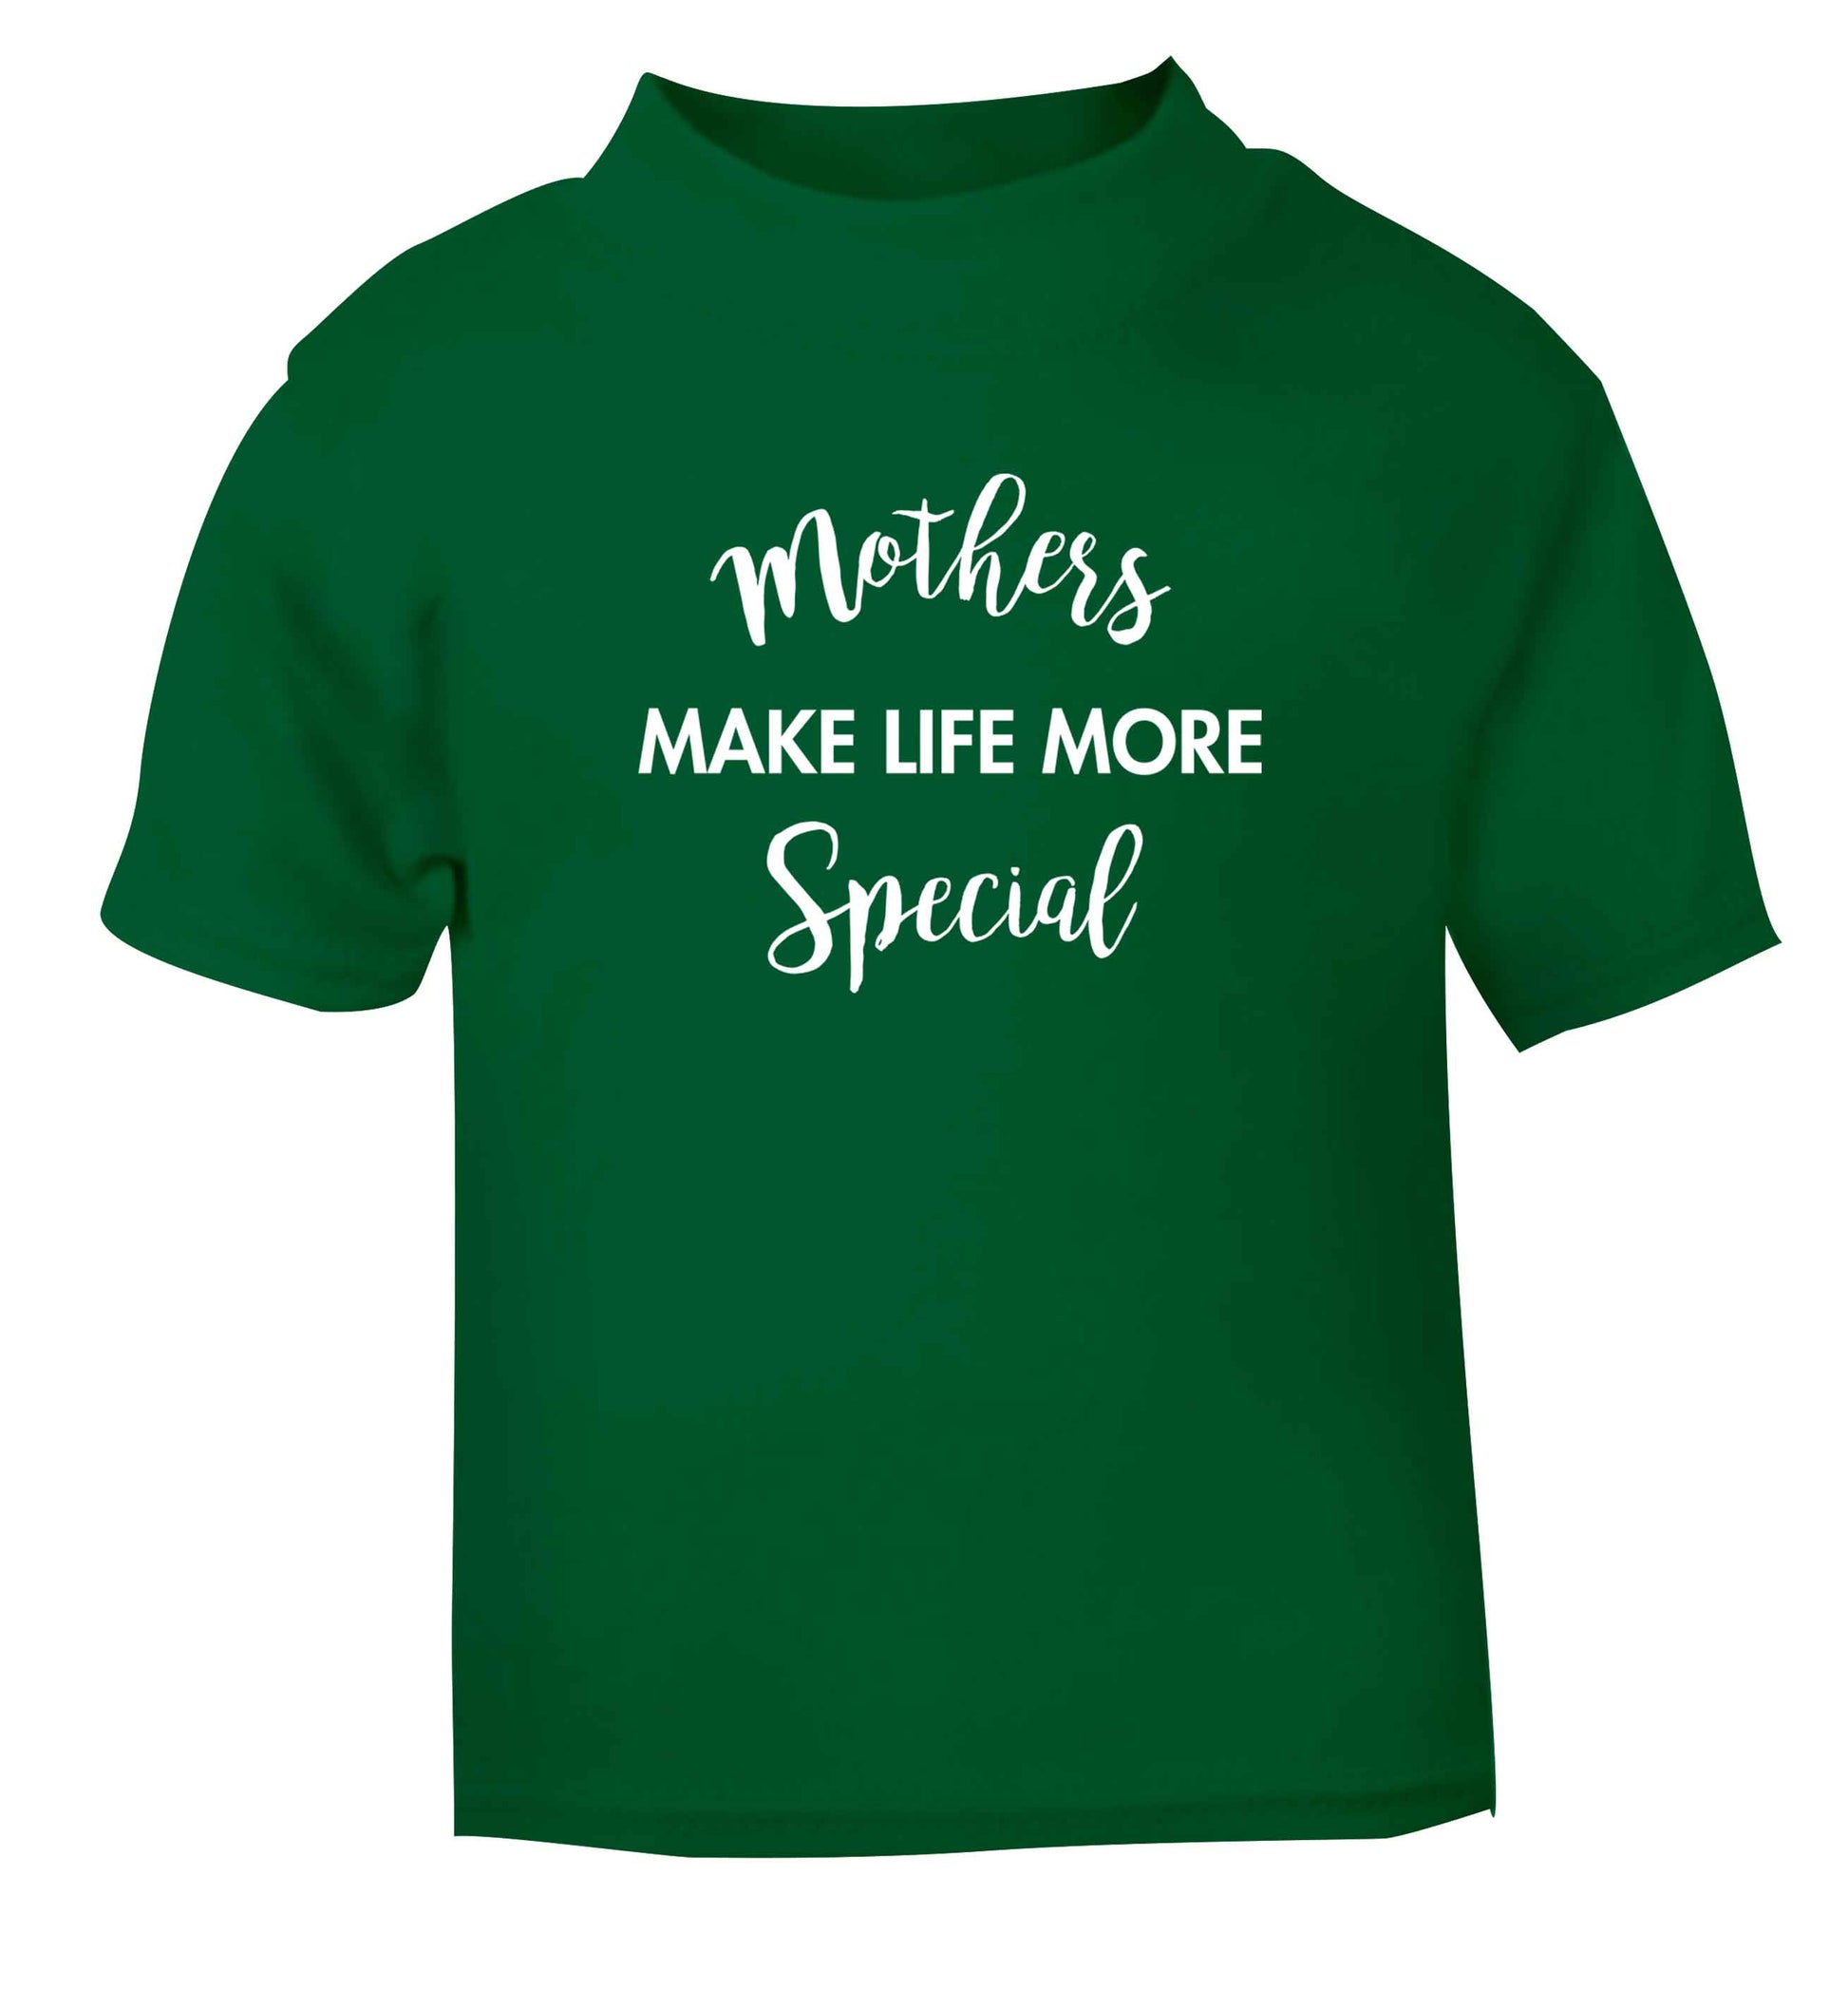 Mother's make life more special green baby toddler Tshirt 2 Years